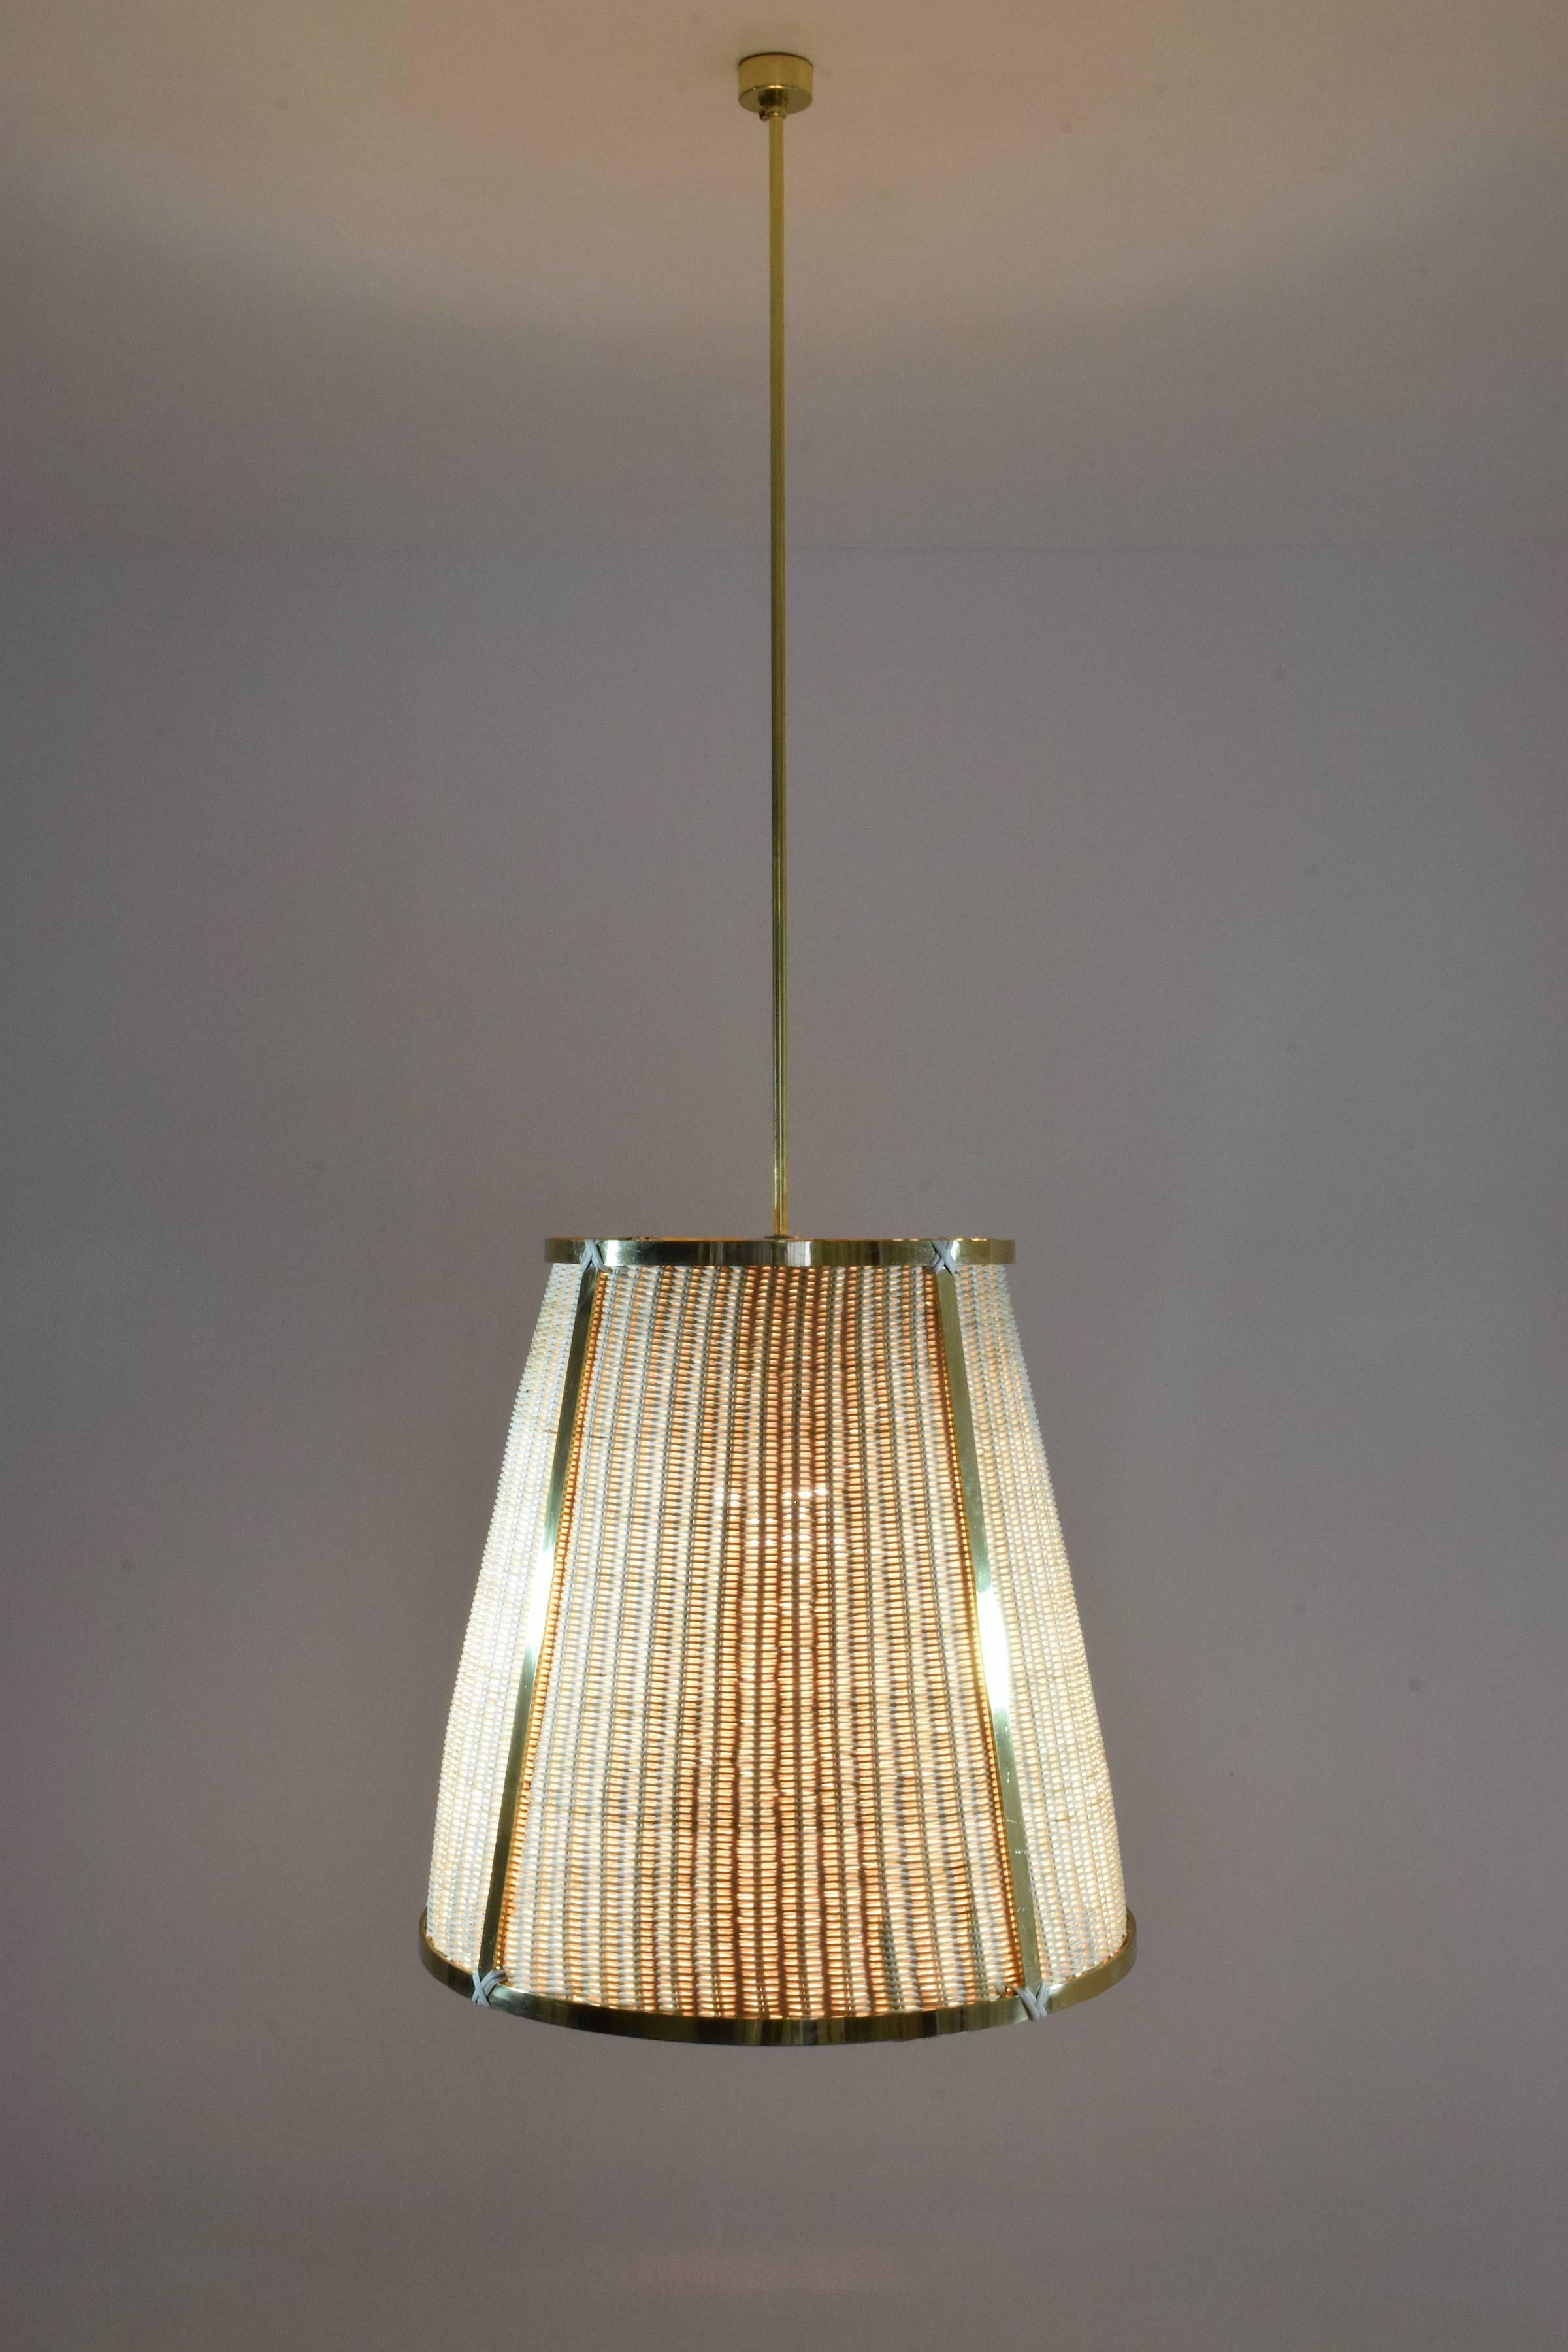 The Caeli-S contemporary handcrafted made-to-measure pendant light fixture features an expertly handcrafted brass structure and a hand-woven rattan shade. This piece creates a warm and inviting ambiance, perfect for living areas or kitchen island